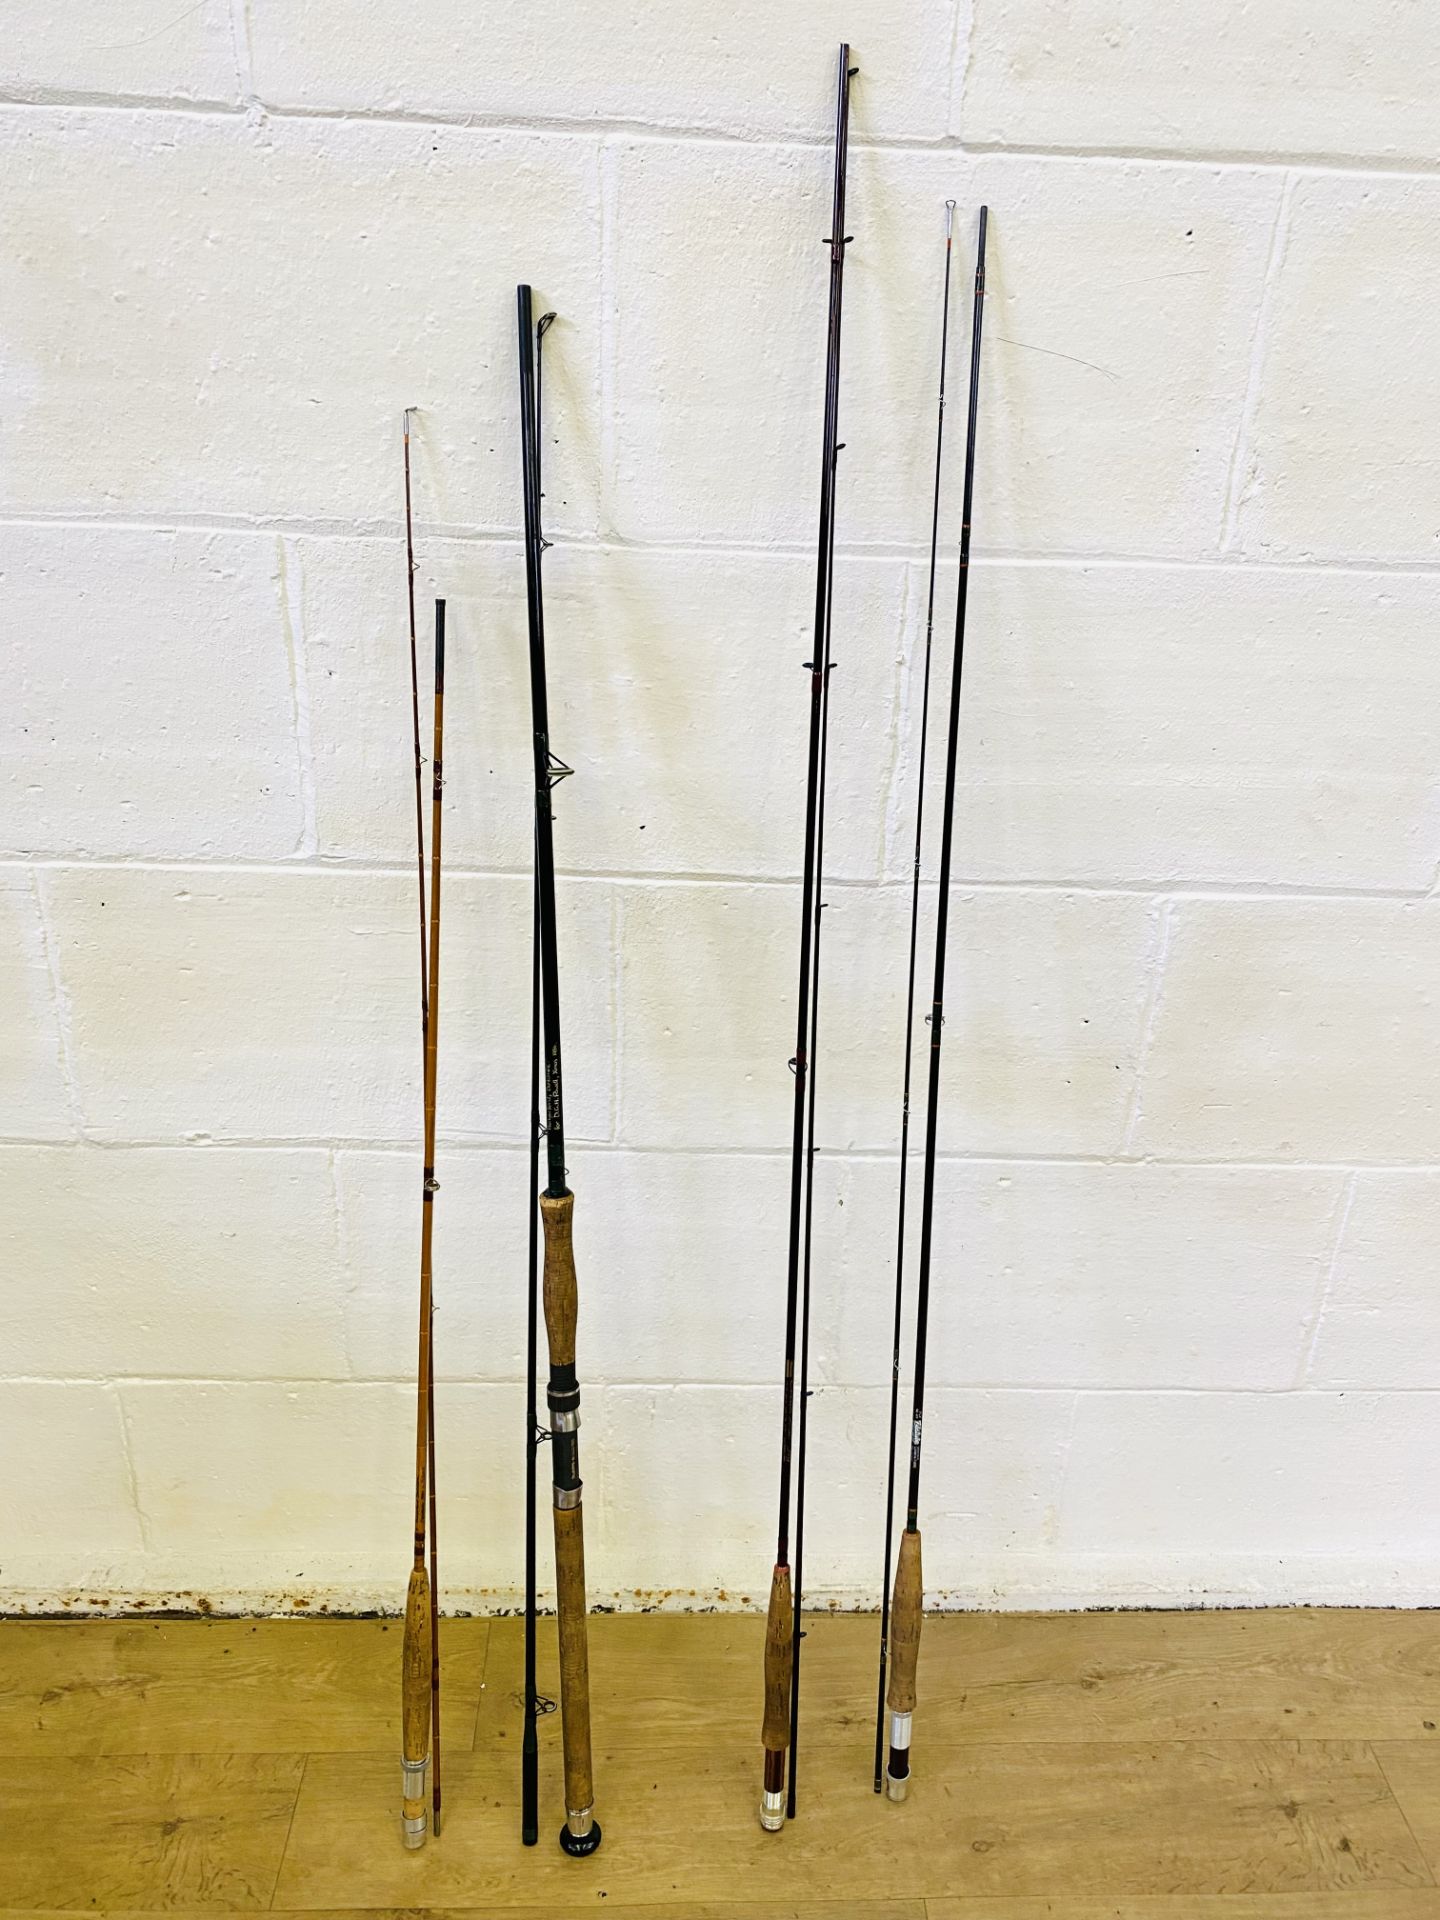 Four fly fishing rods